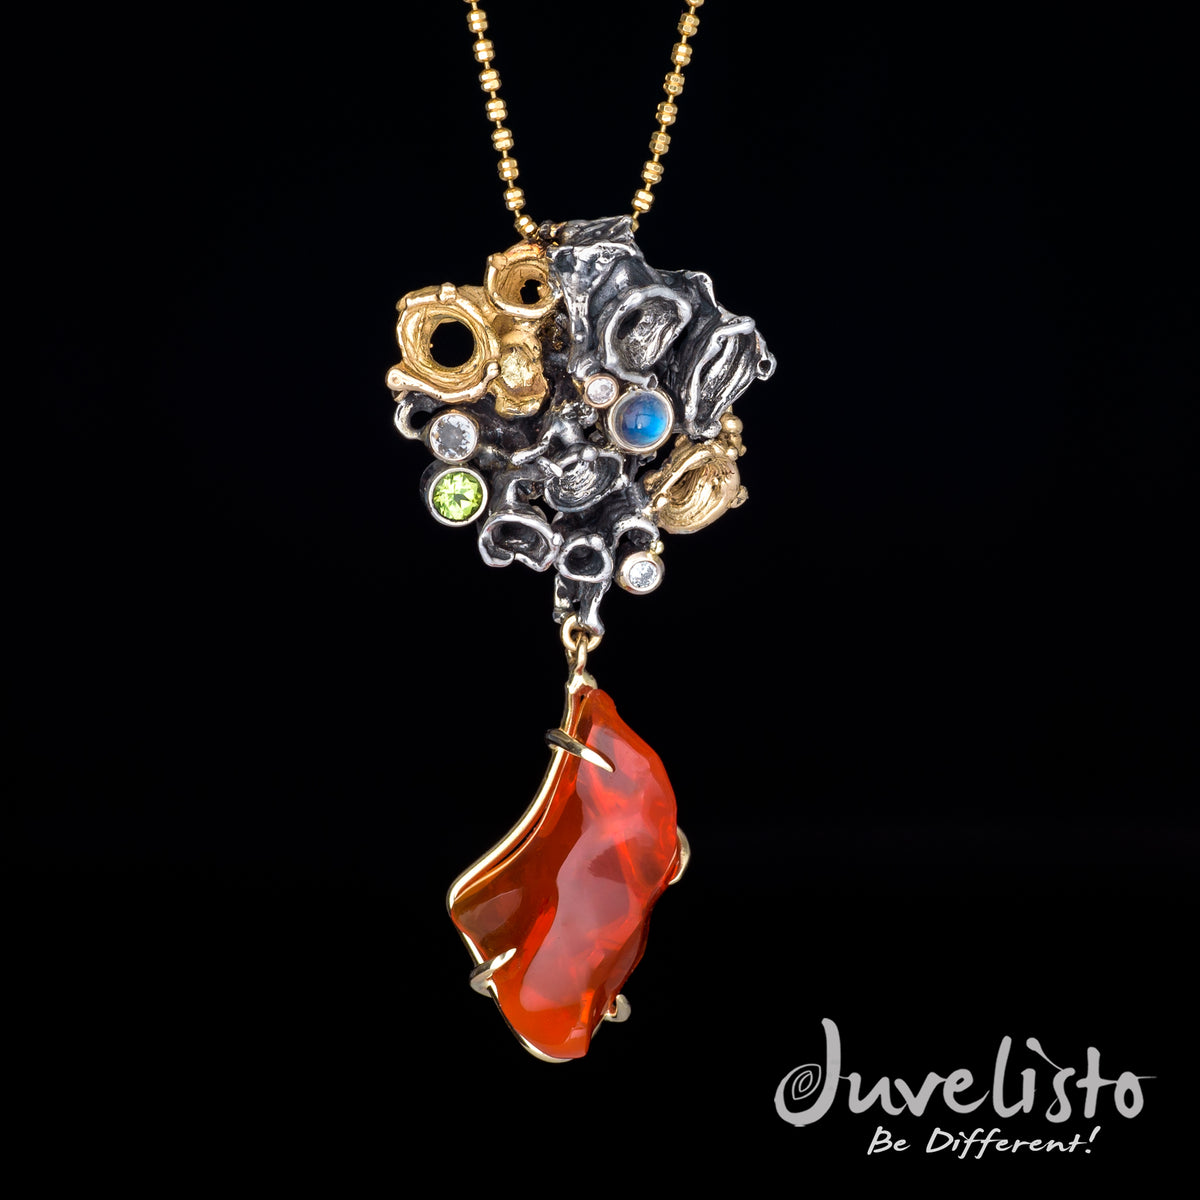 Juvelisto Design  Mexican Fire Opal Gold and Silver Pendant with Peridot, Moonstone, and Diamonds